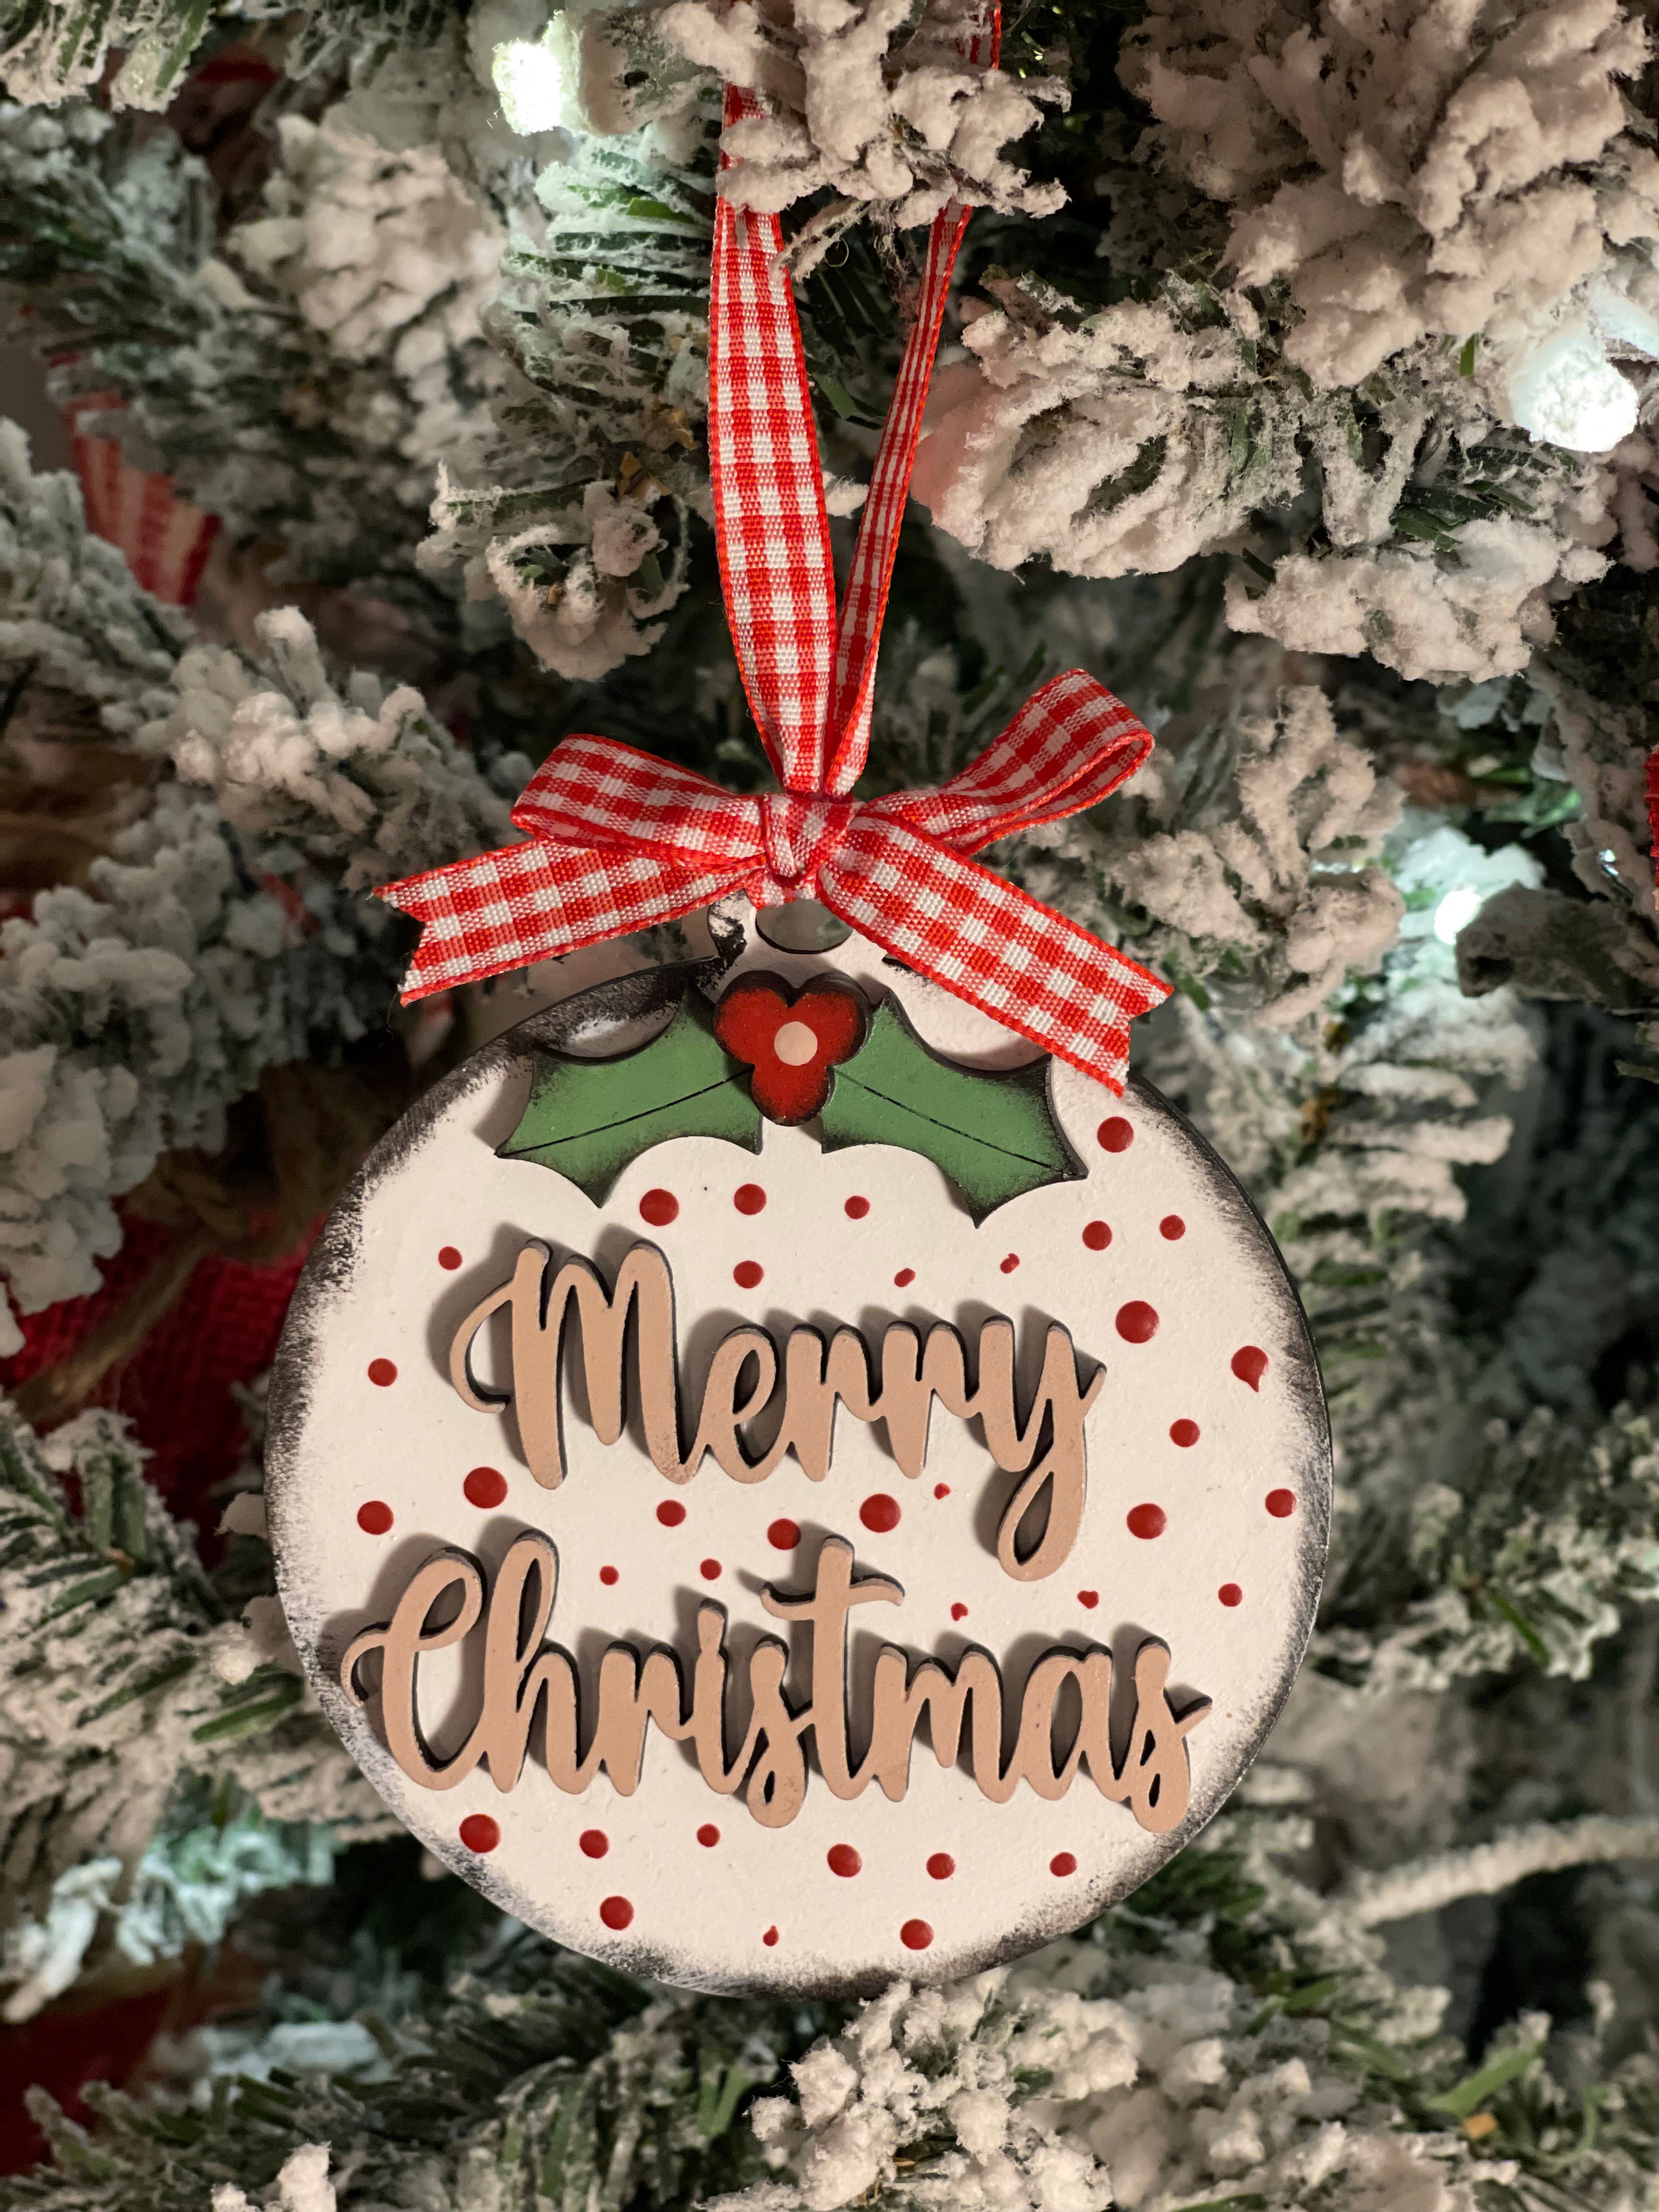 Merry Christmas ornament is displayed hanging on a tree.